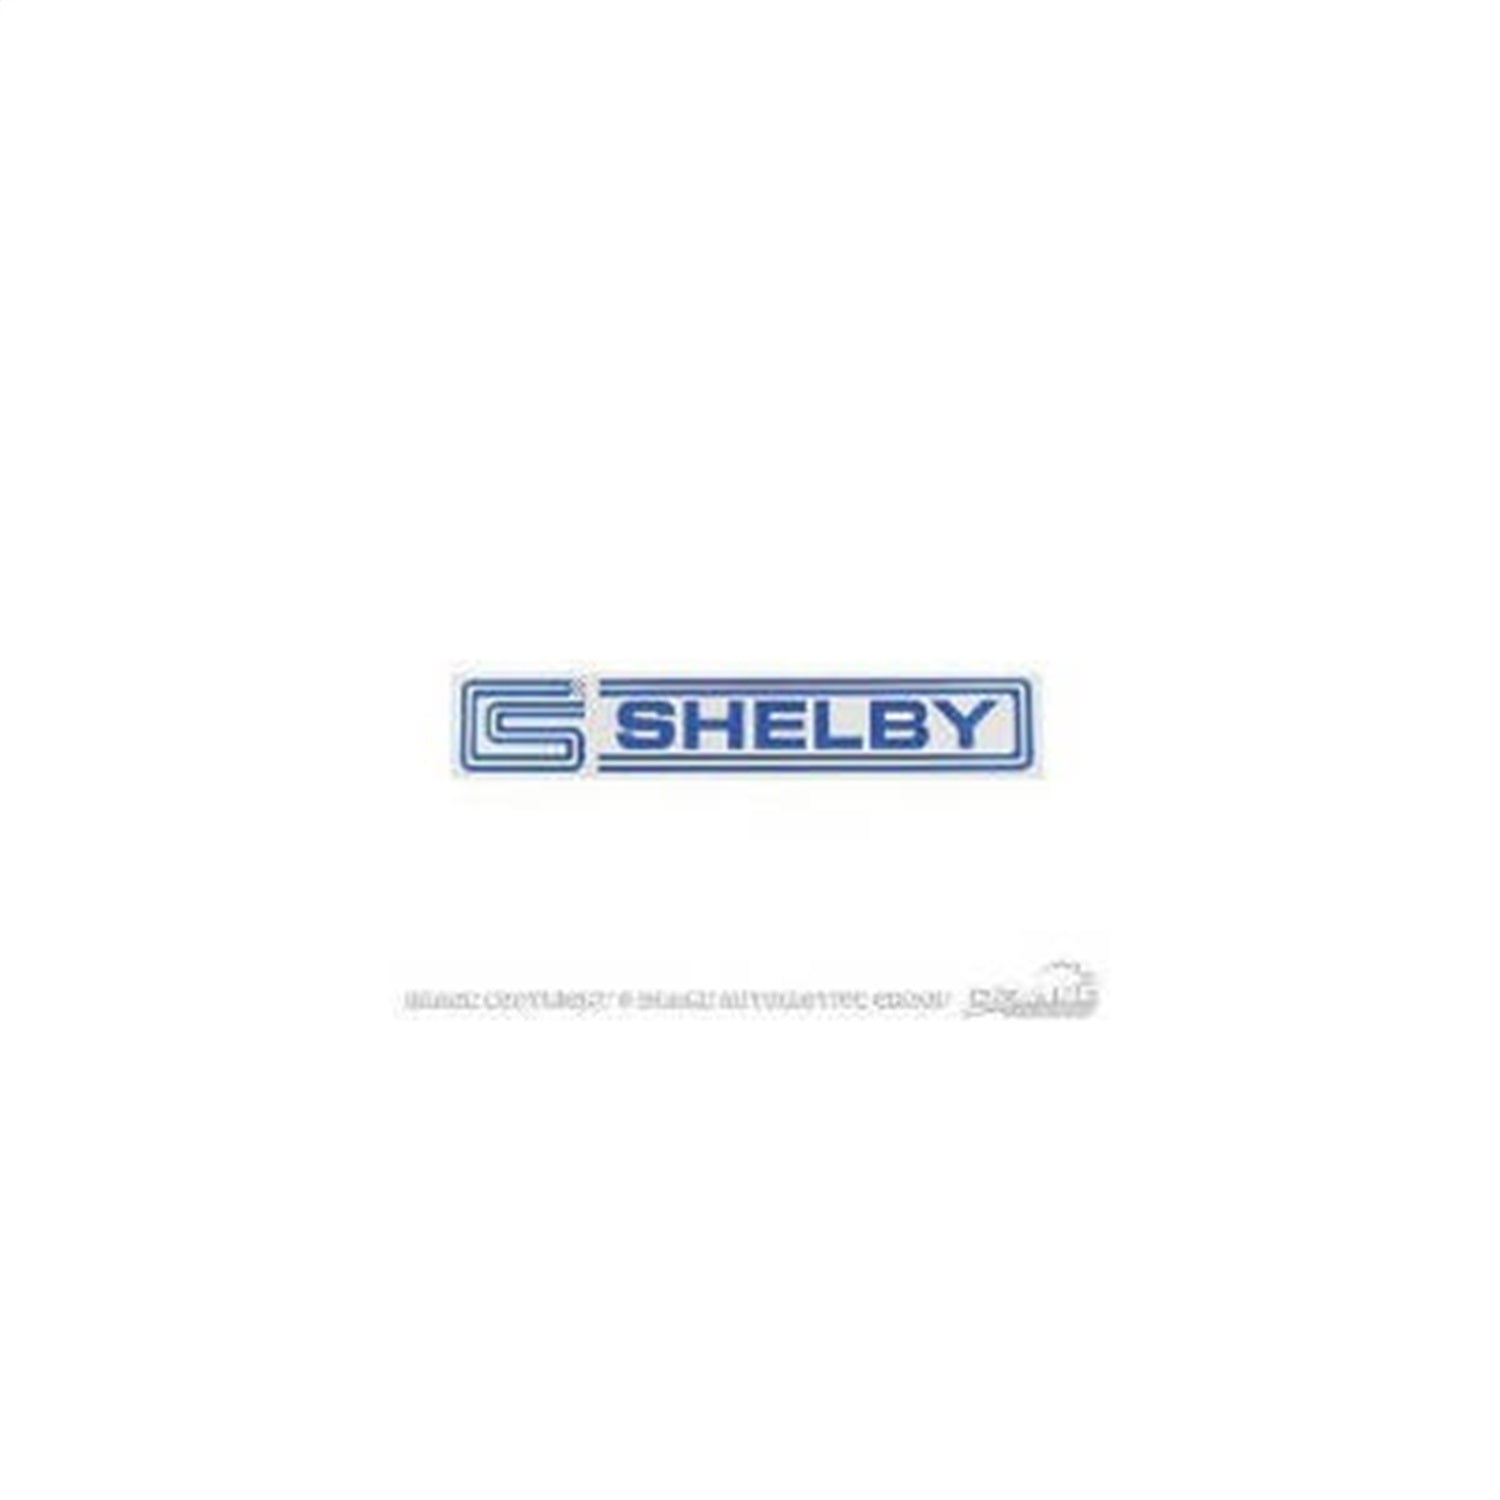 Shelby Decal